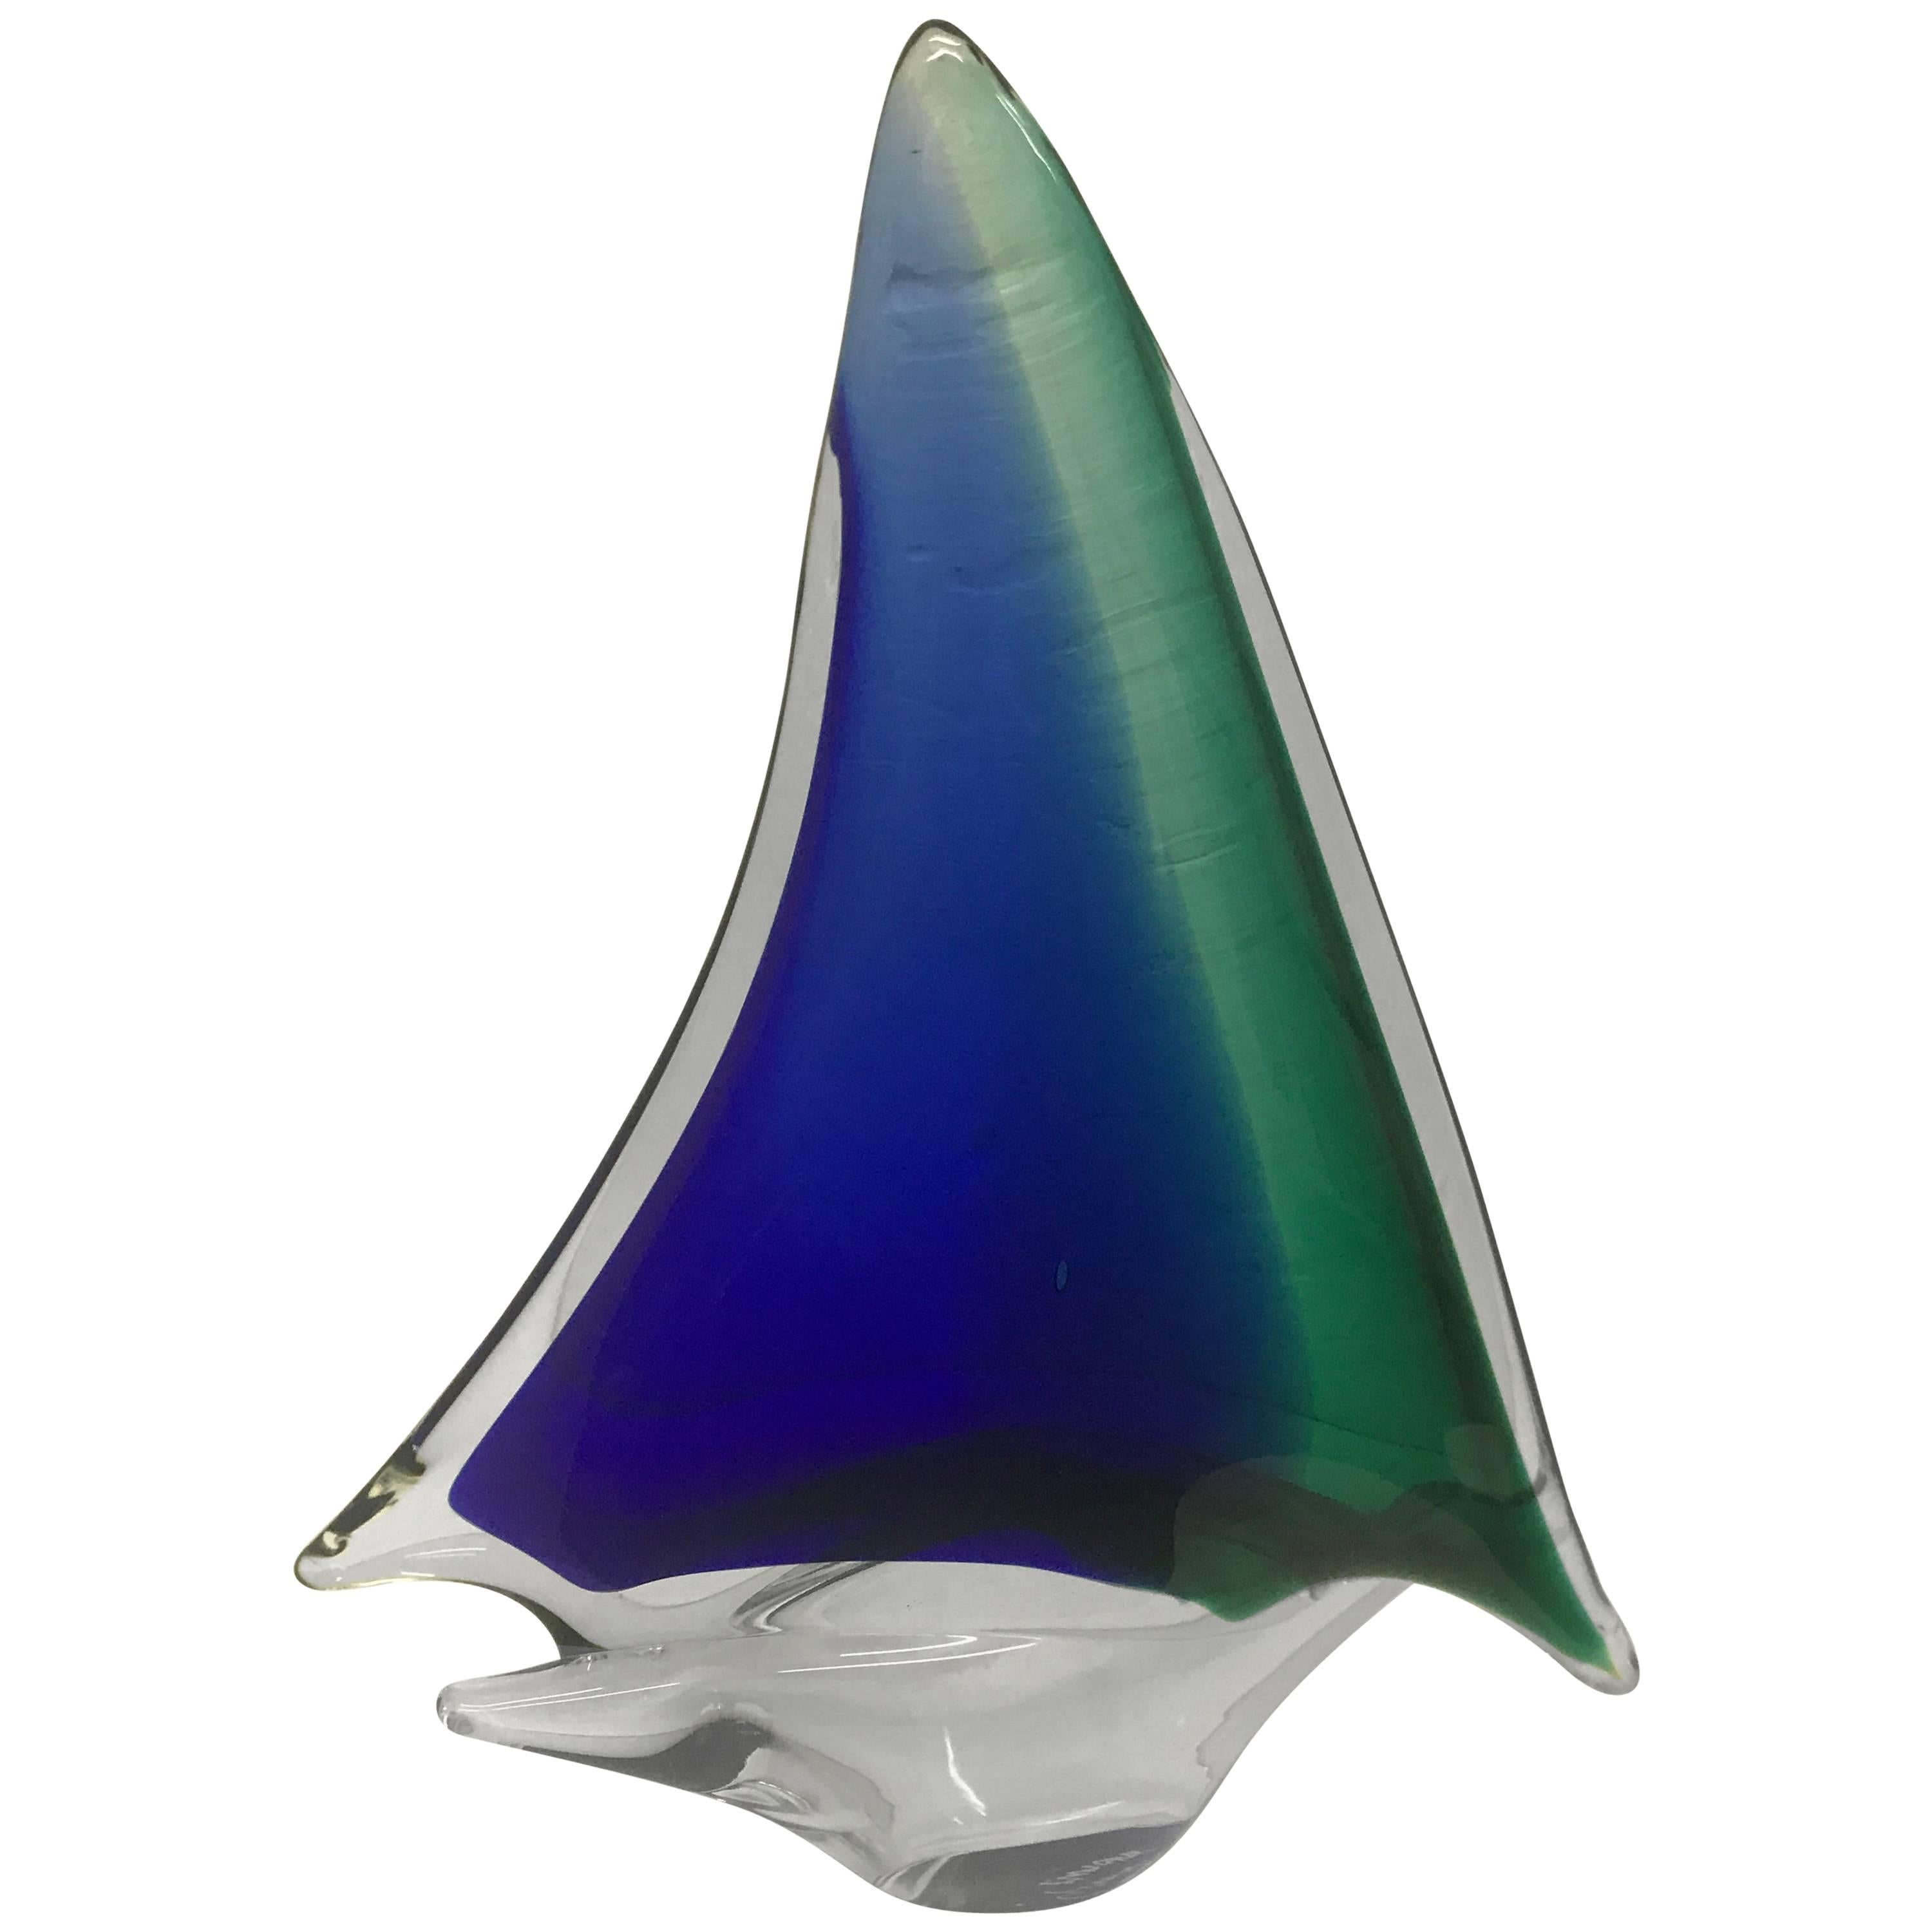 Vintage Murano Glass Sculpture of a Sail Boat Piece, circa 1970